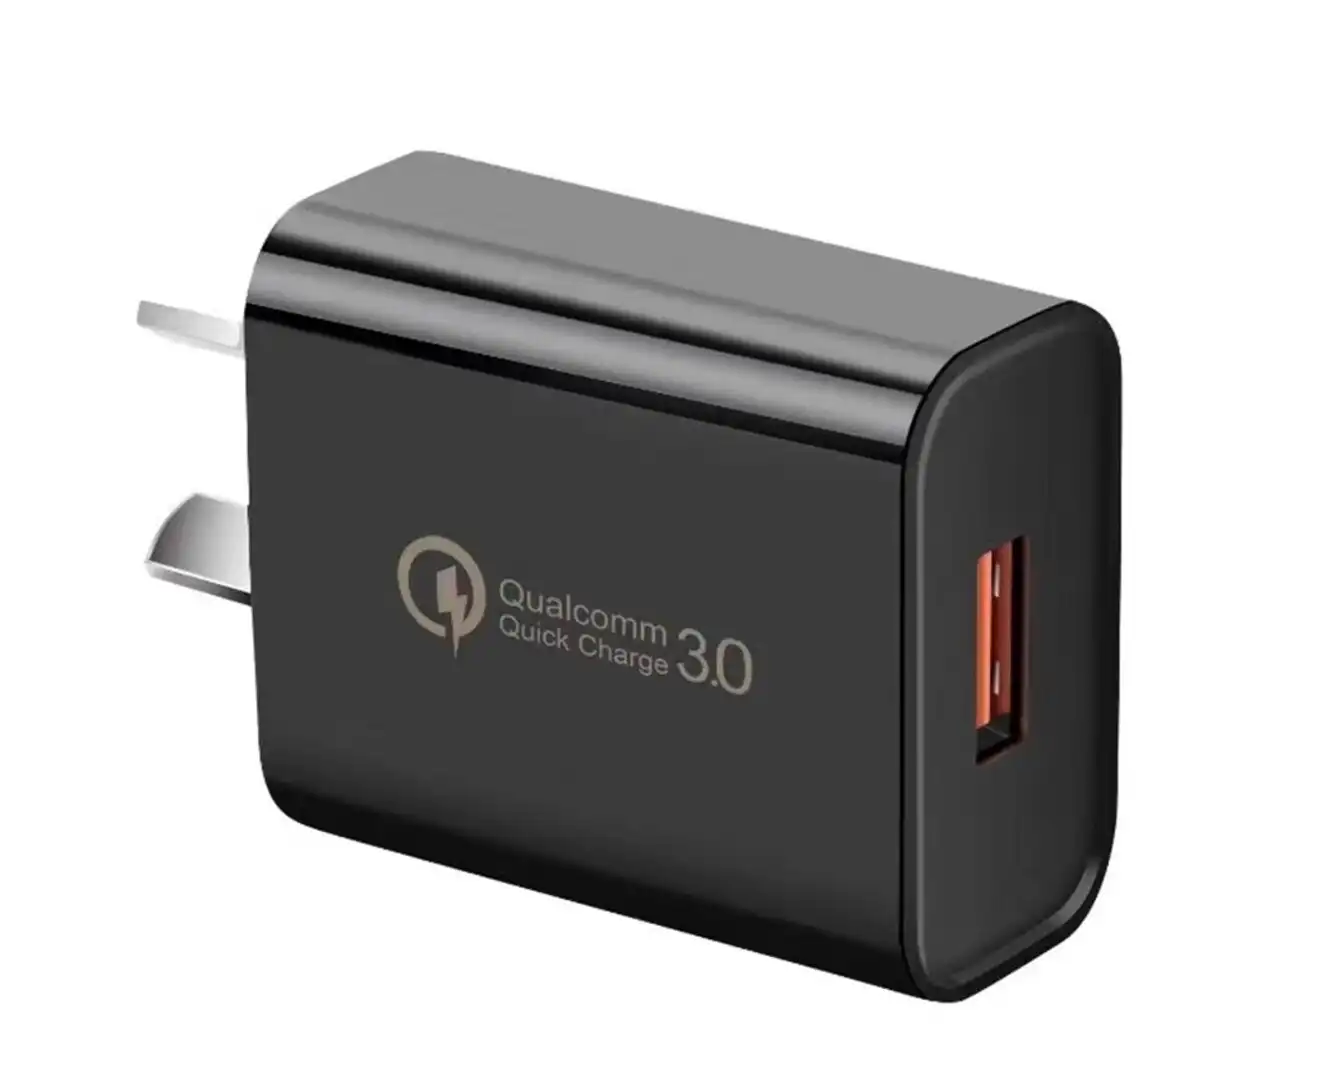 Orotec 18W Qualcomm 3.0 Quick Charge USB Wall Charger, Black